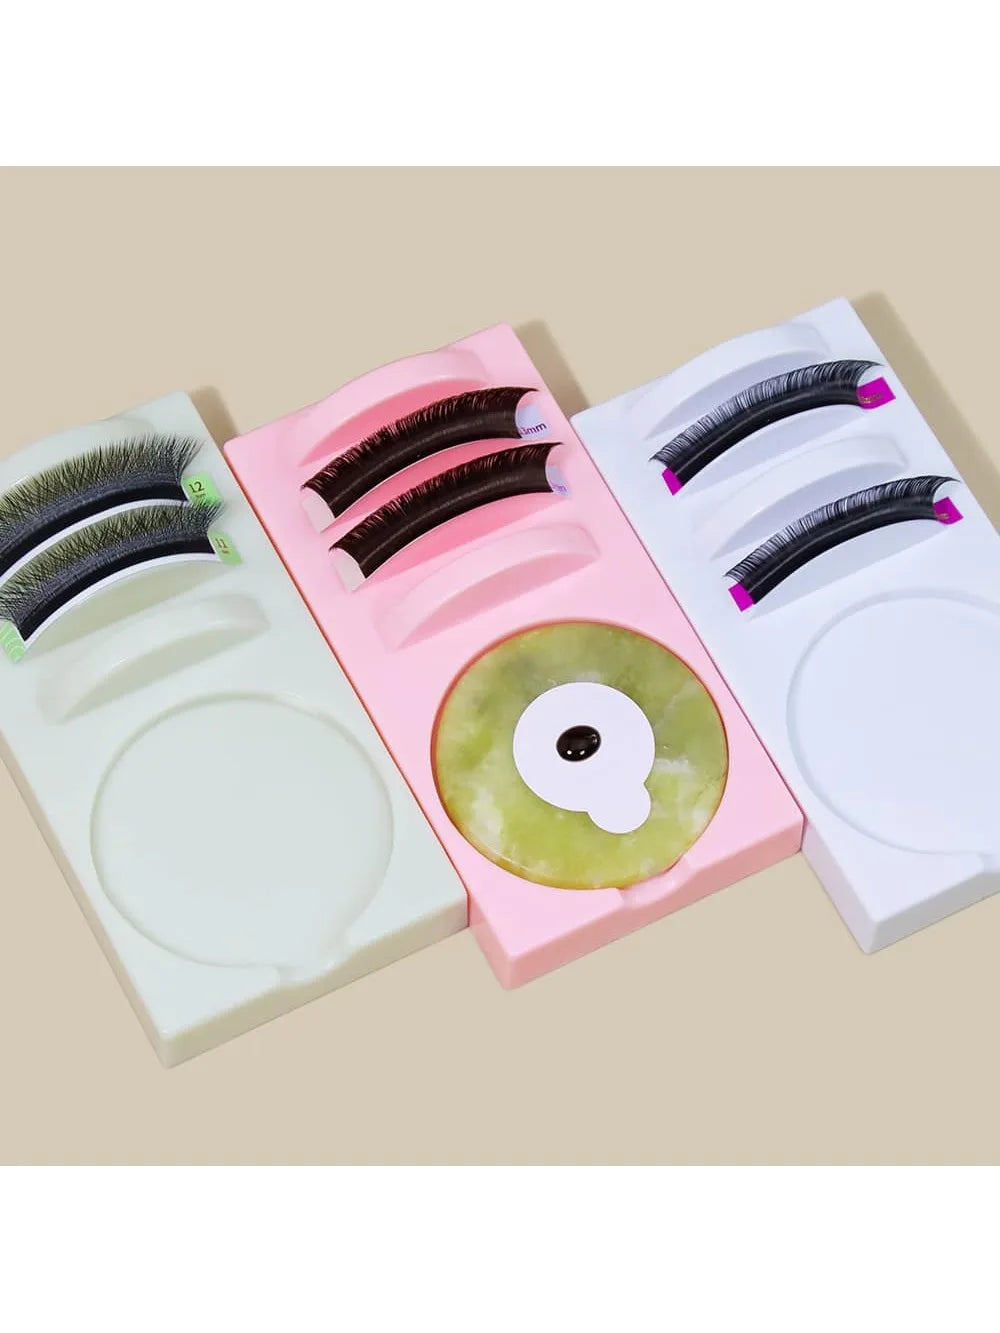 1 pcs 2 in 1 Eyelash Extension Plate Tray Grafting False Lashes Holder Glue Pallet Board Stand Pad